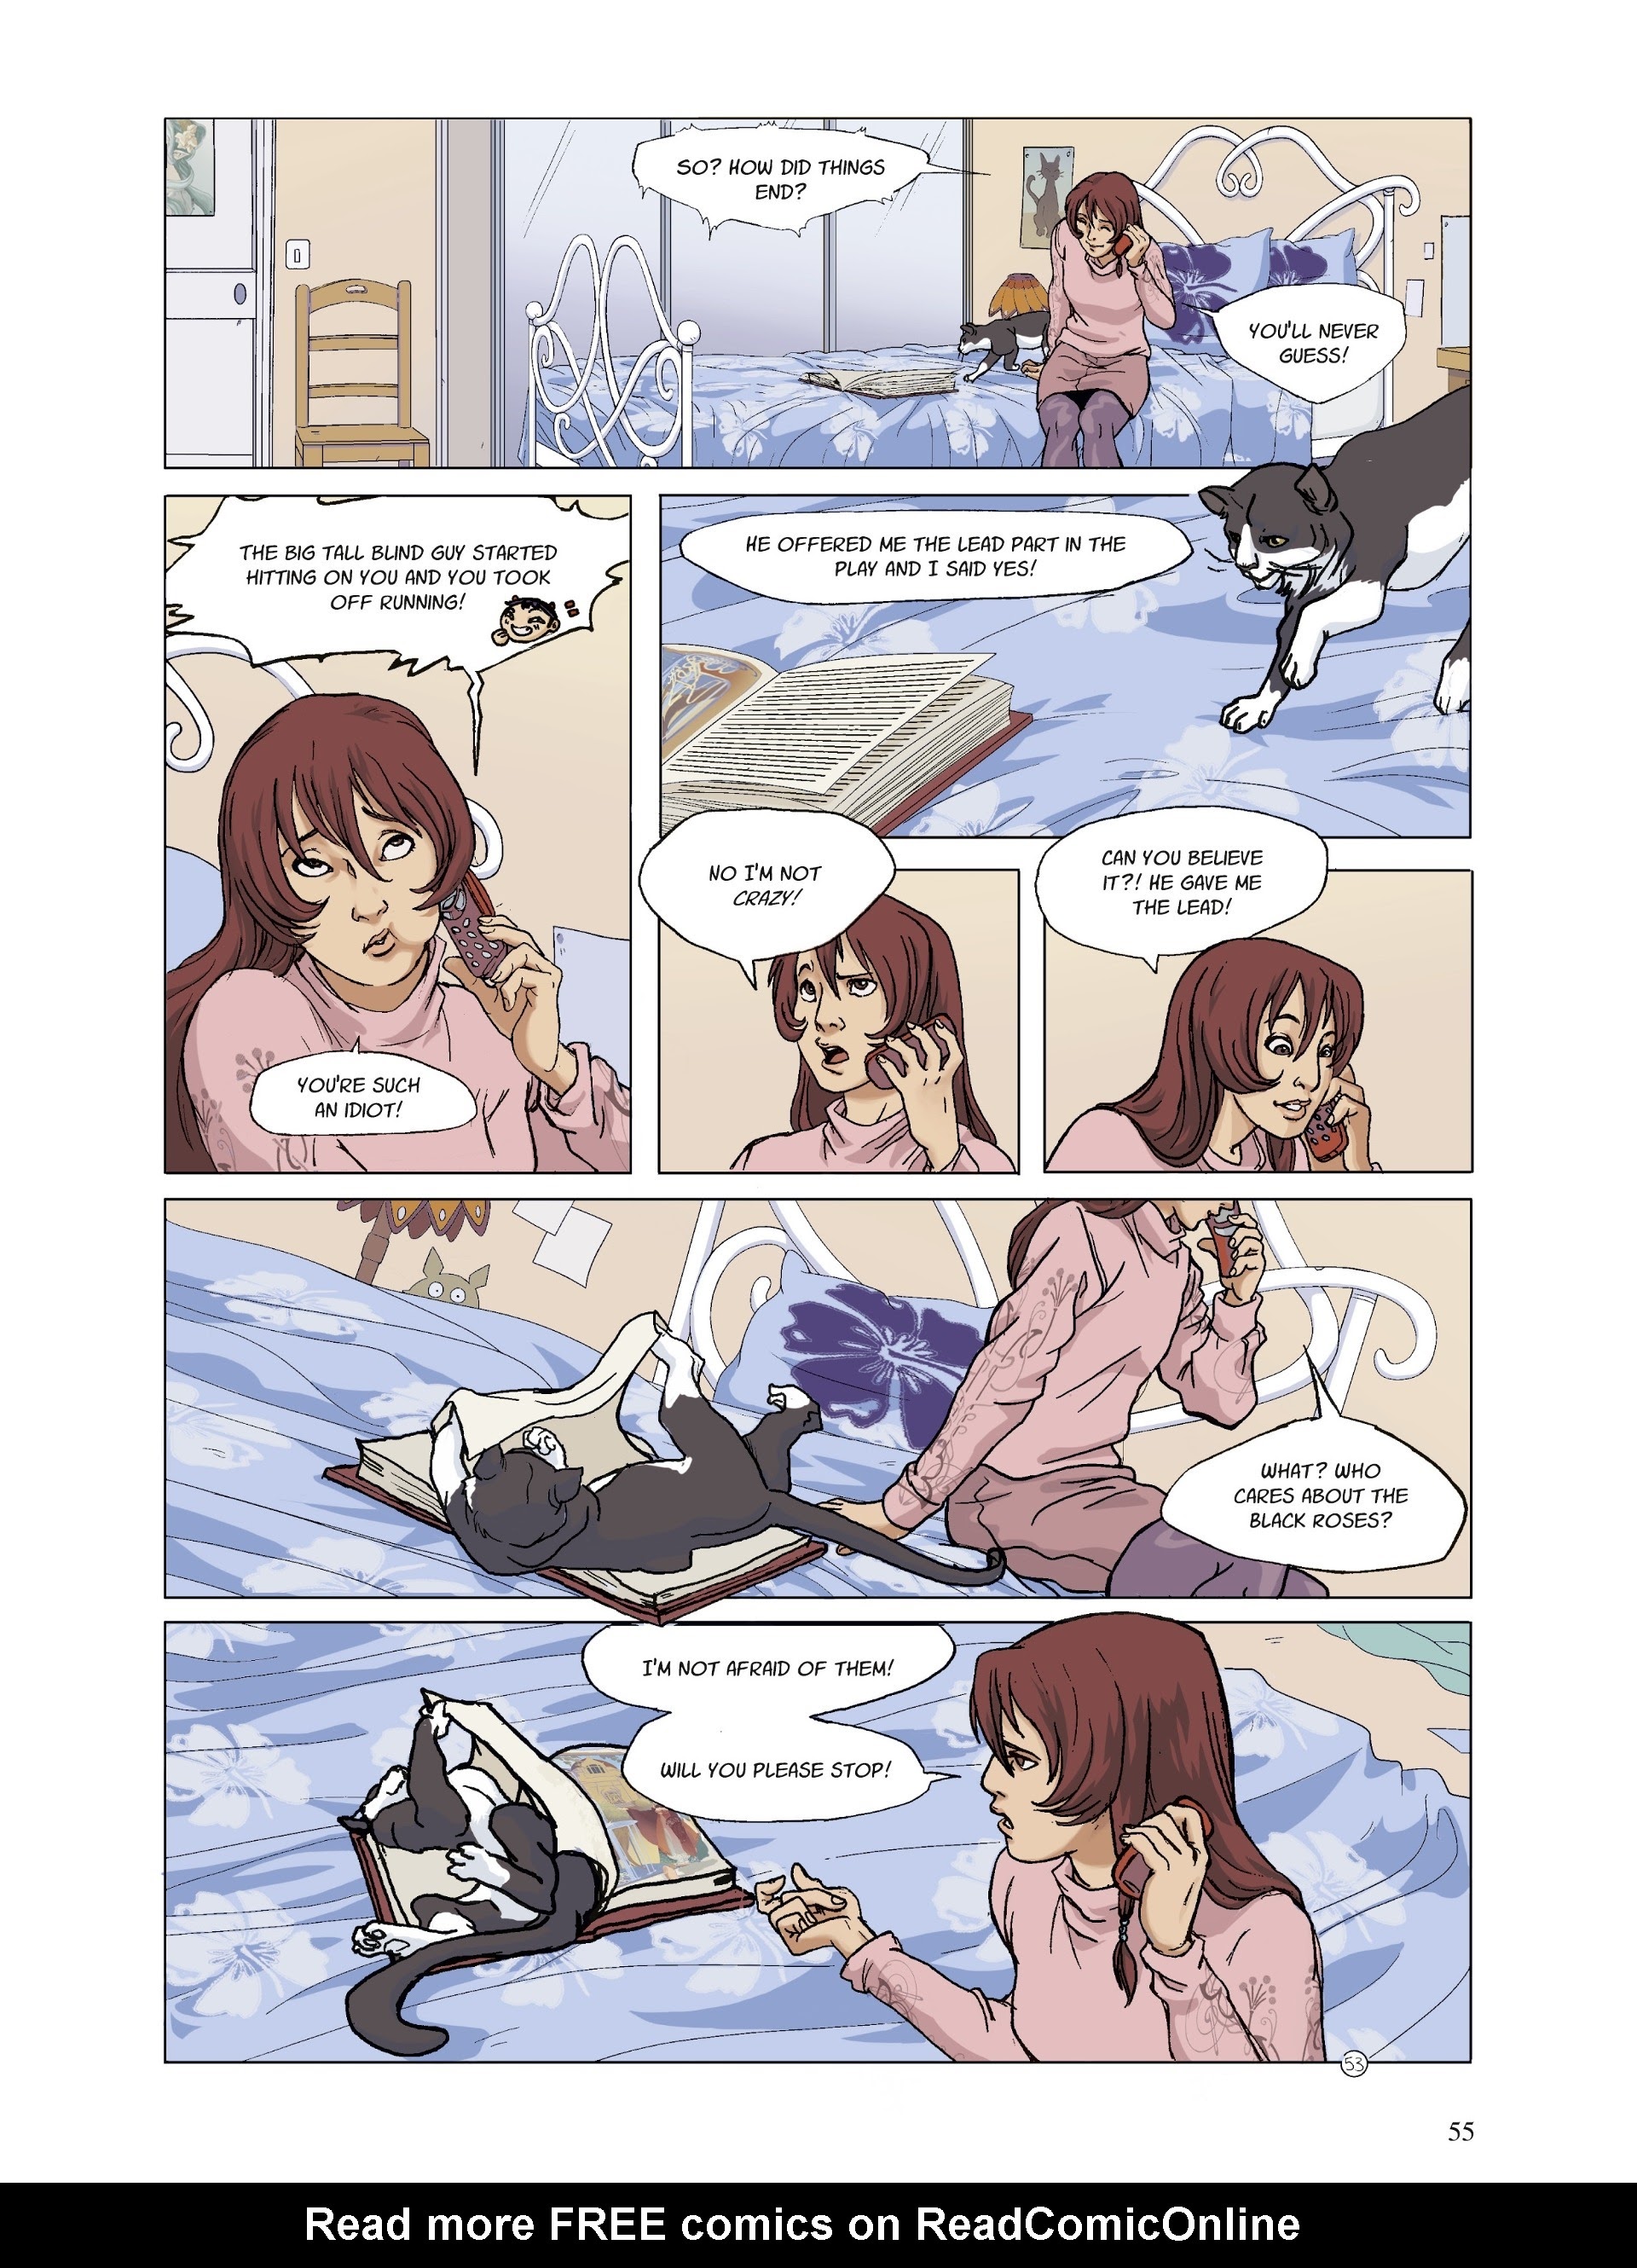 Read online Nanami comic -  Issue #1 - 55